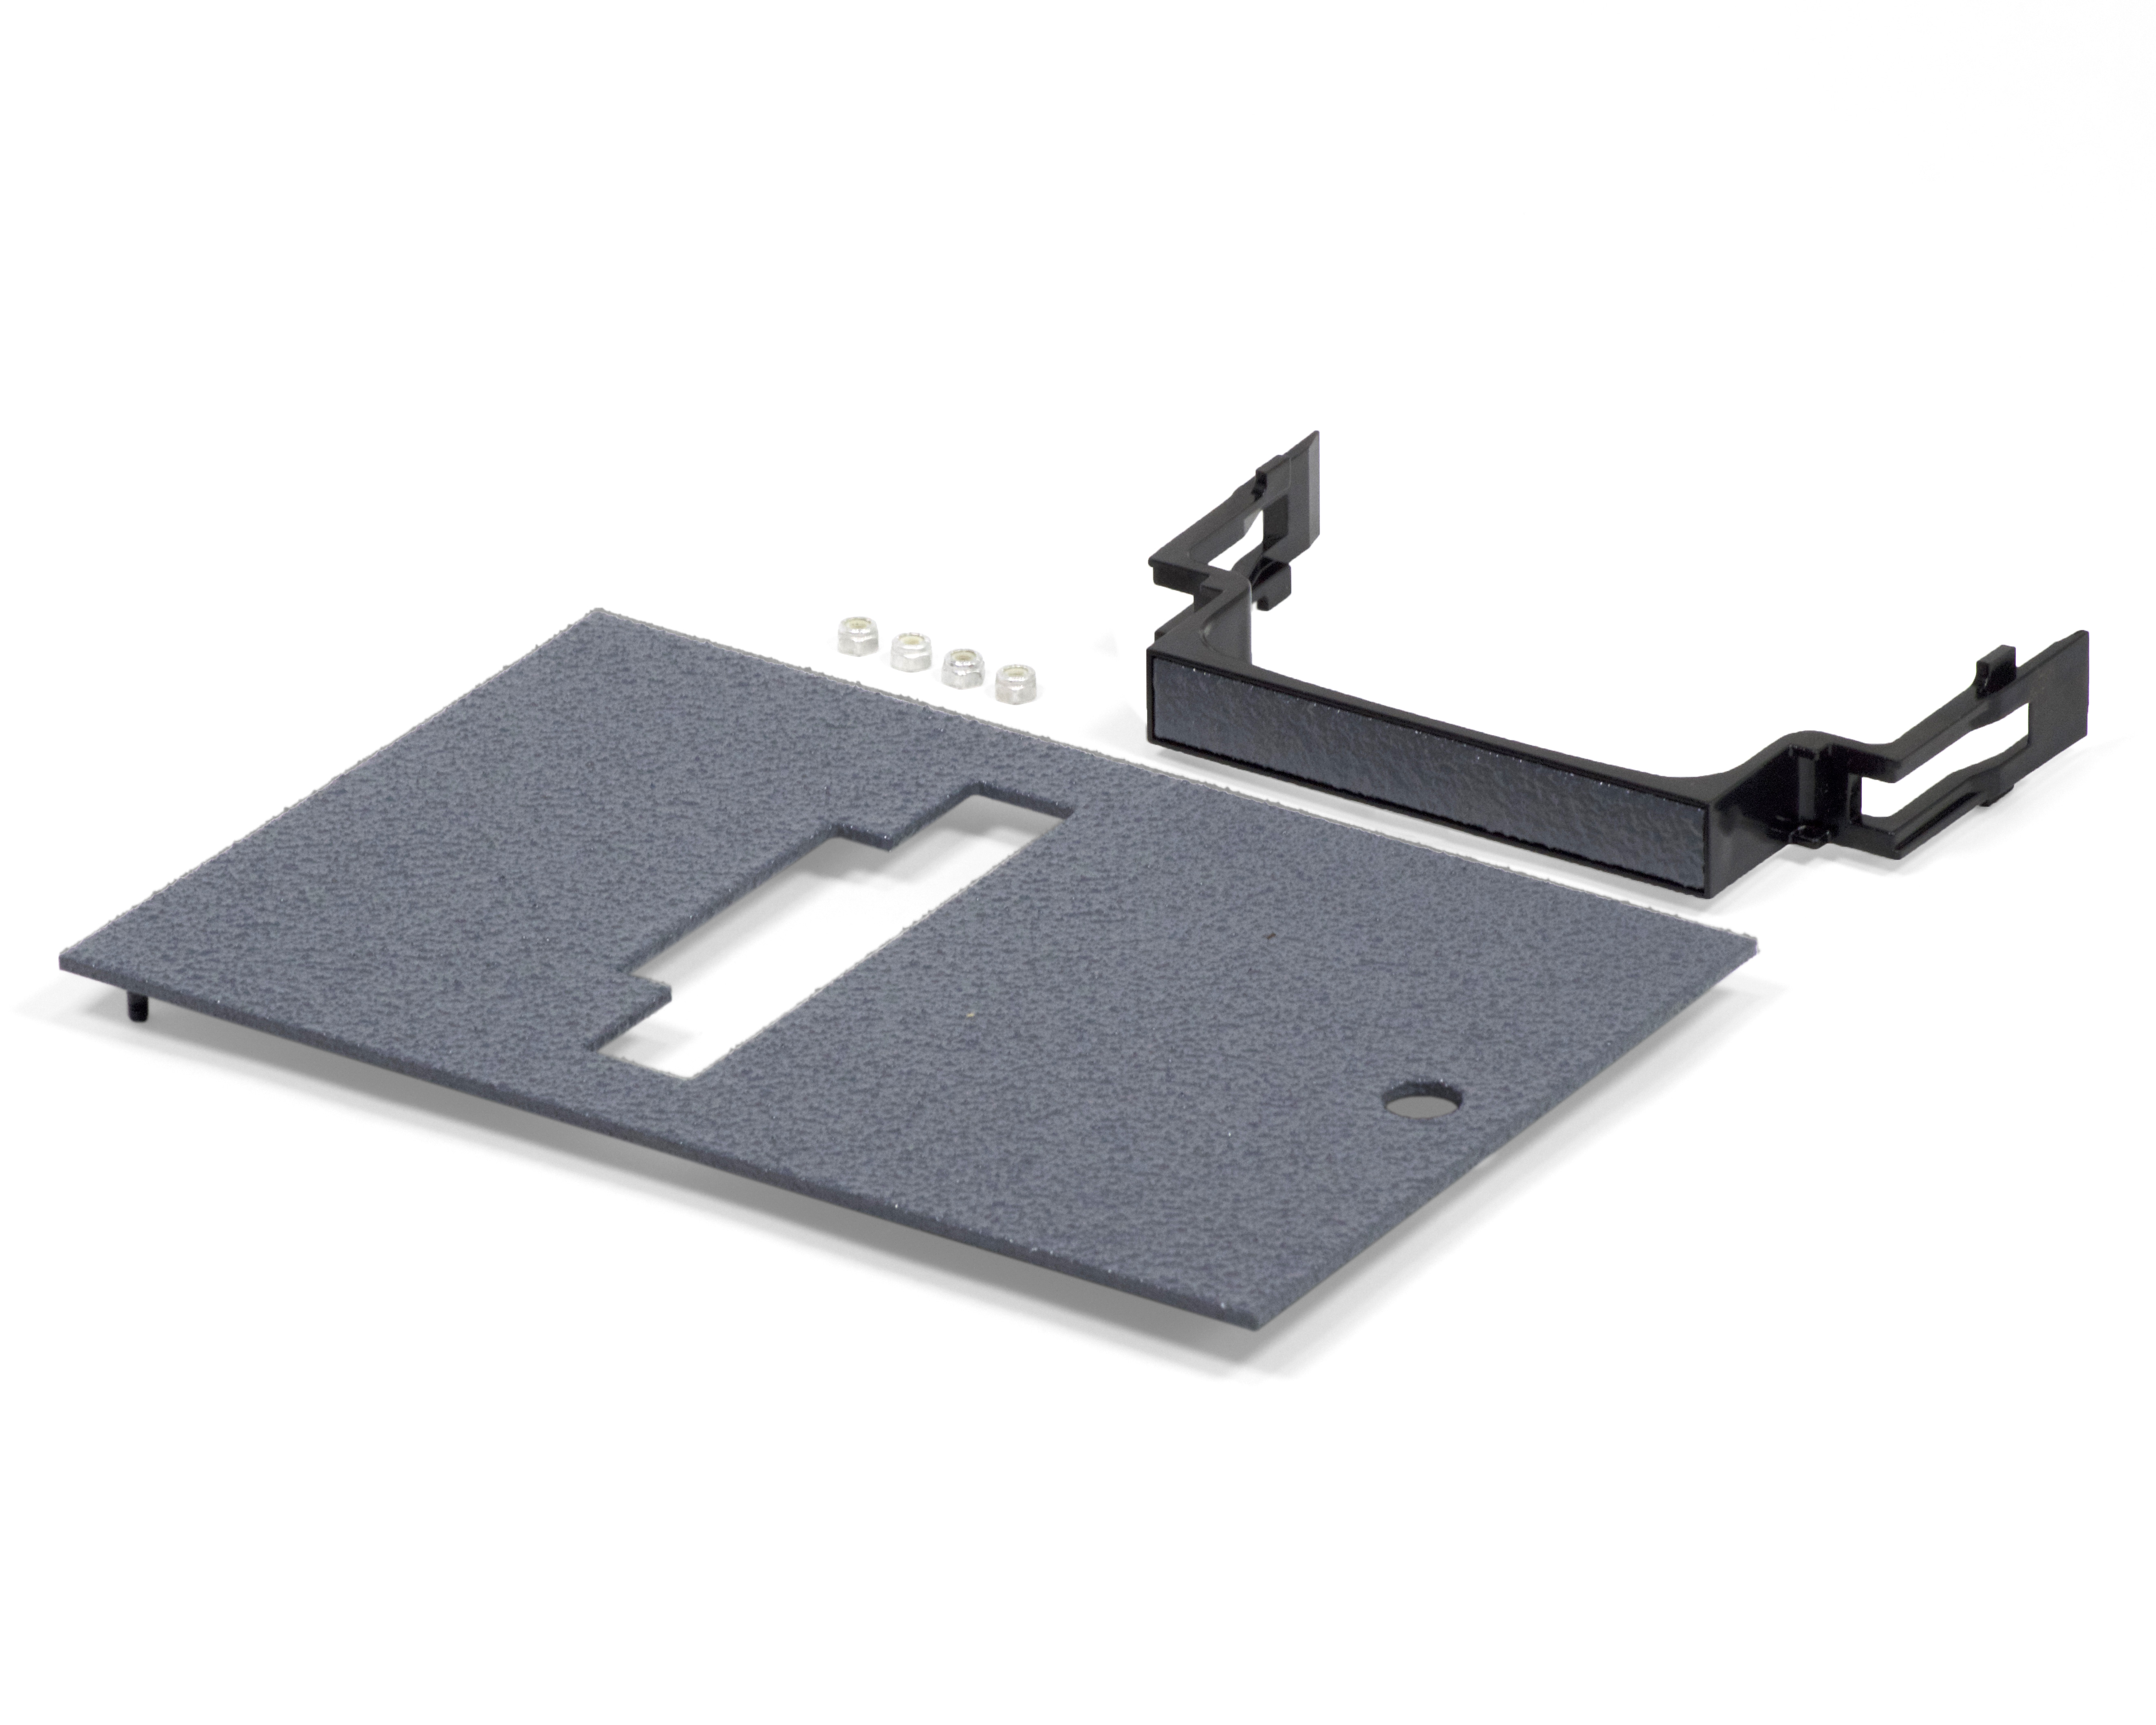 The gray Replacement Cover Plate comes complete with a new handle and all of the mounting hardware required.